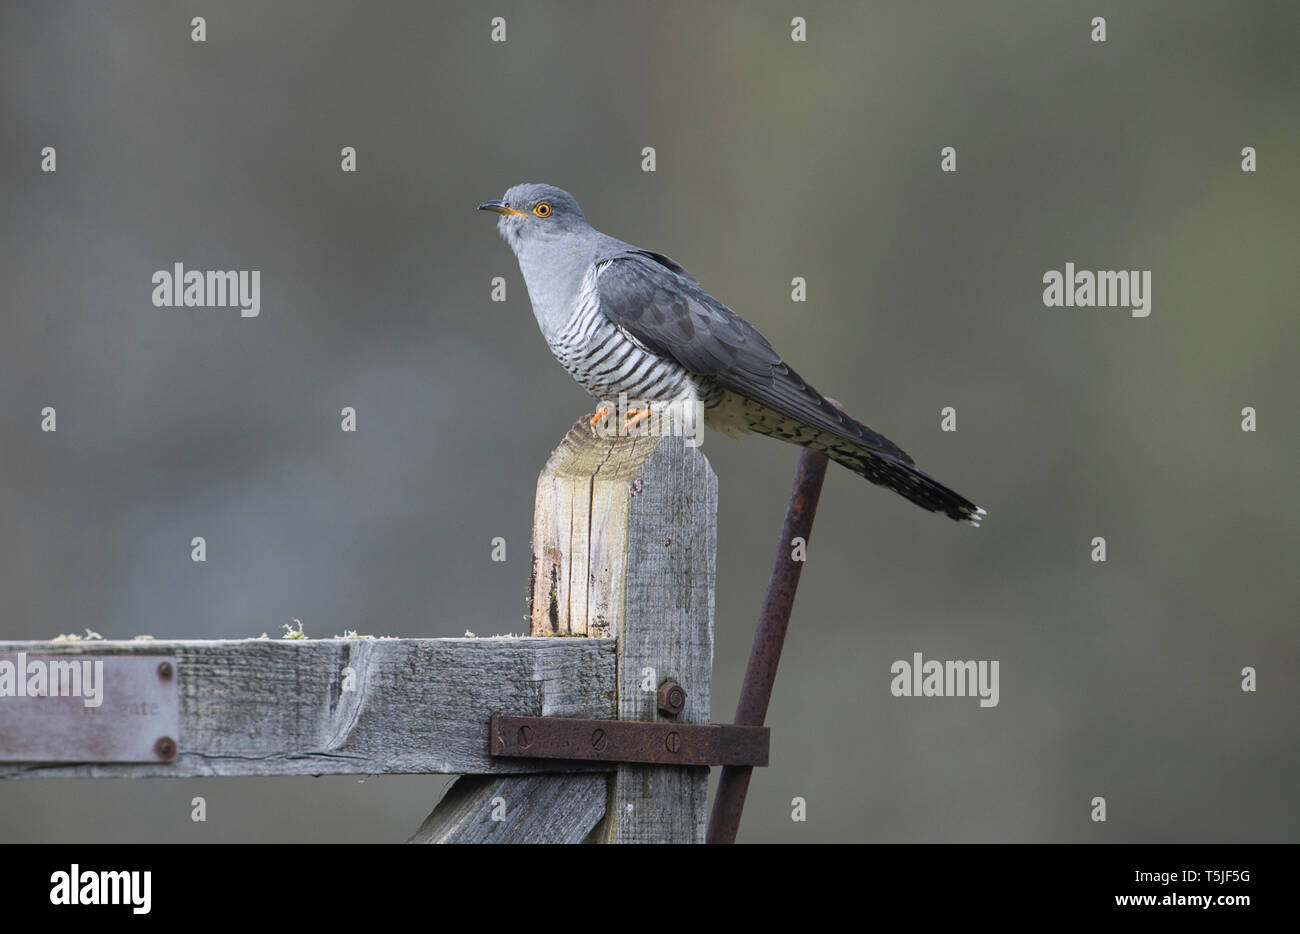 Male cuckoo (Cuculus canorus) perched on an old gate Stock Photo